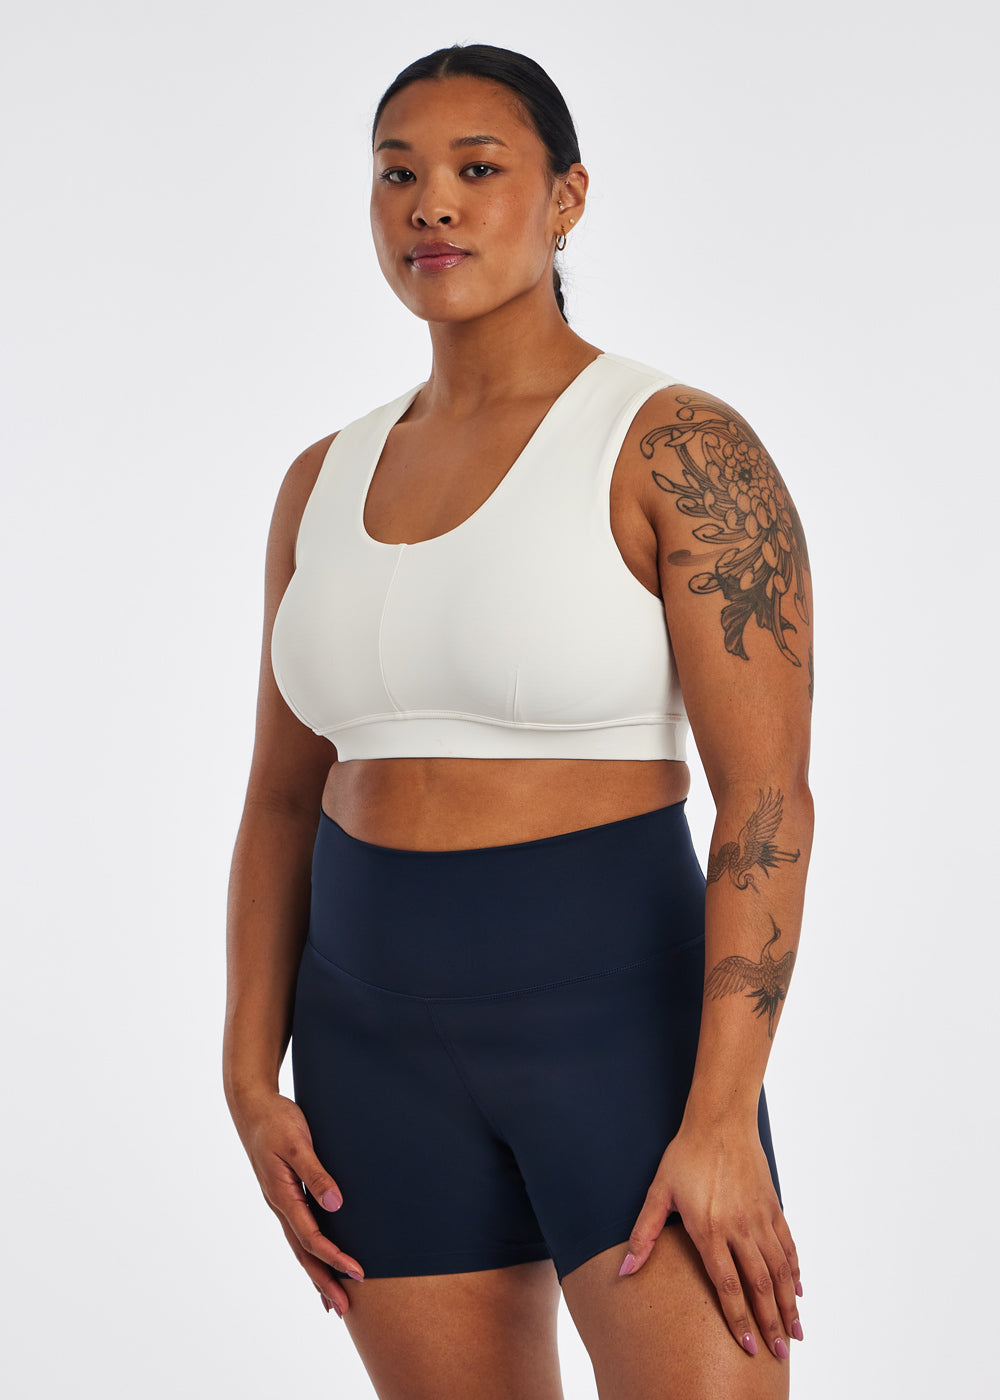 Women's - Compression Fit Sport Bras or Long Sleeves or Short